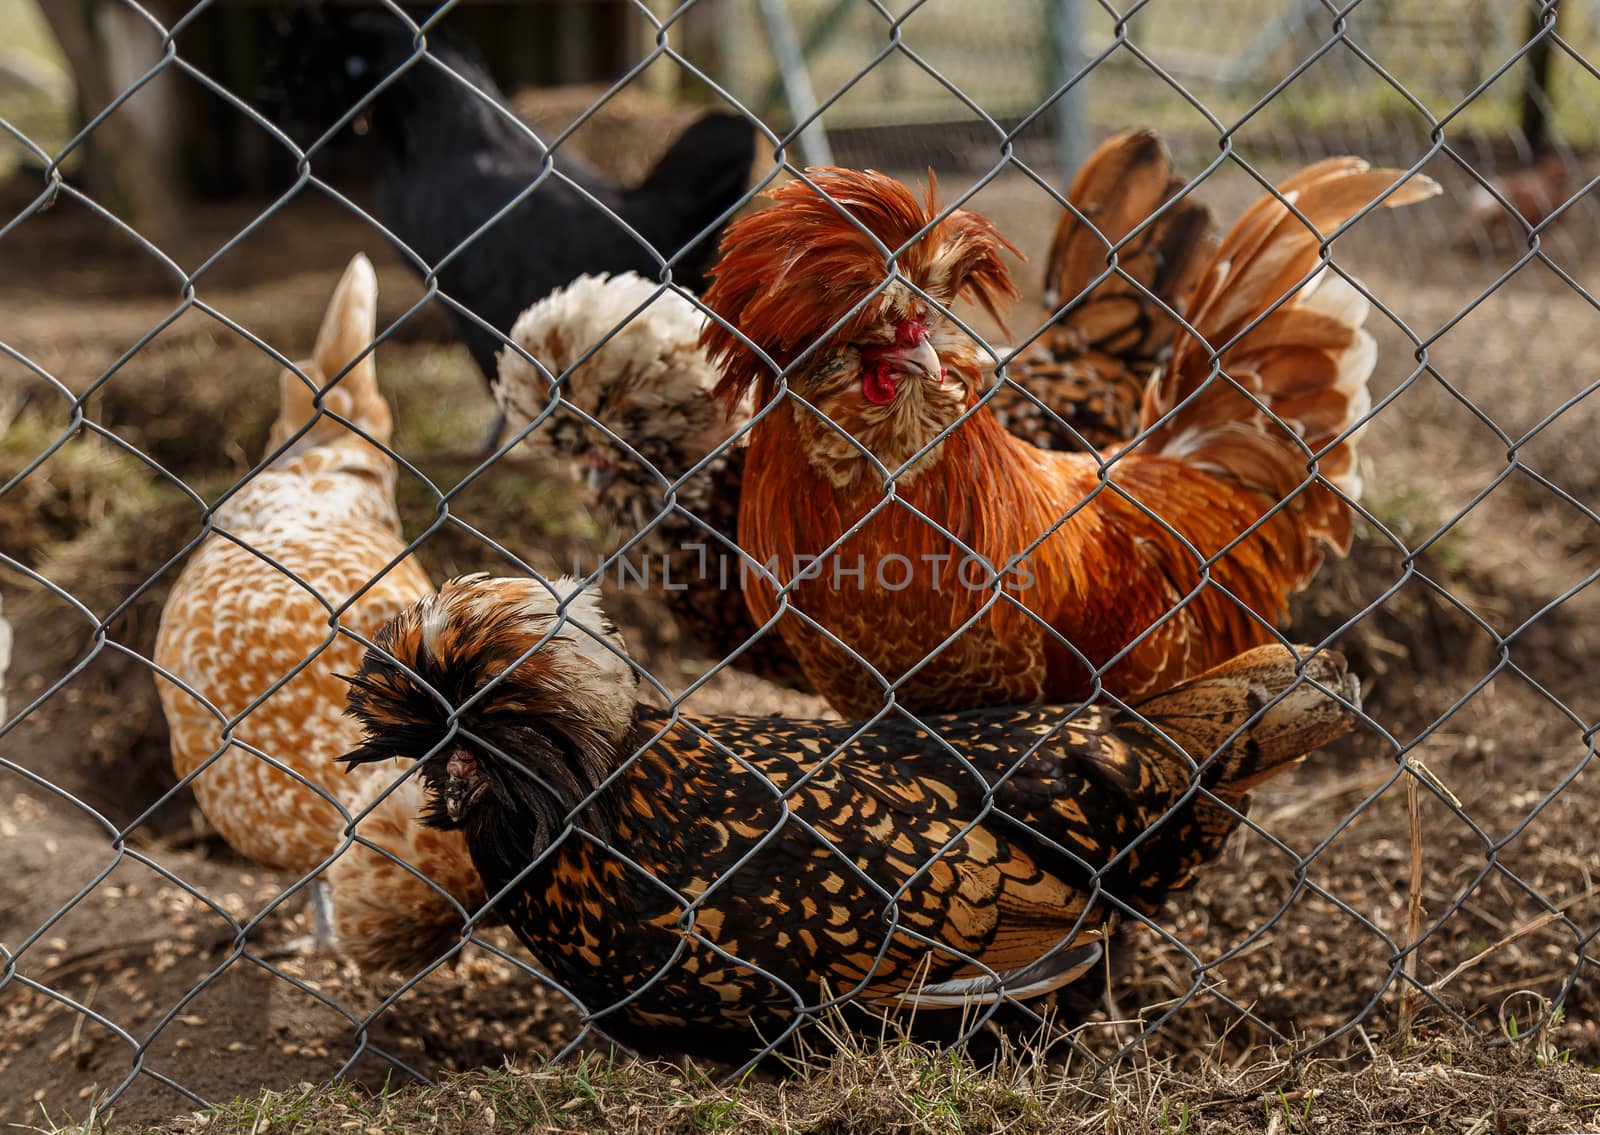 Cockerel with hens in the open-air cage